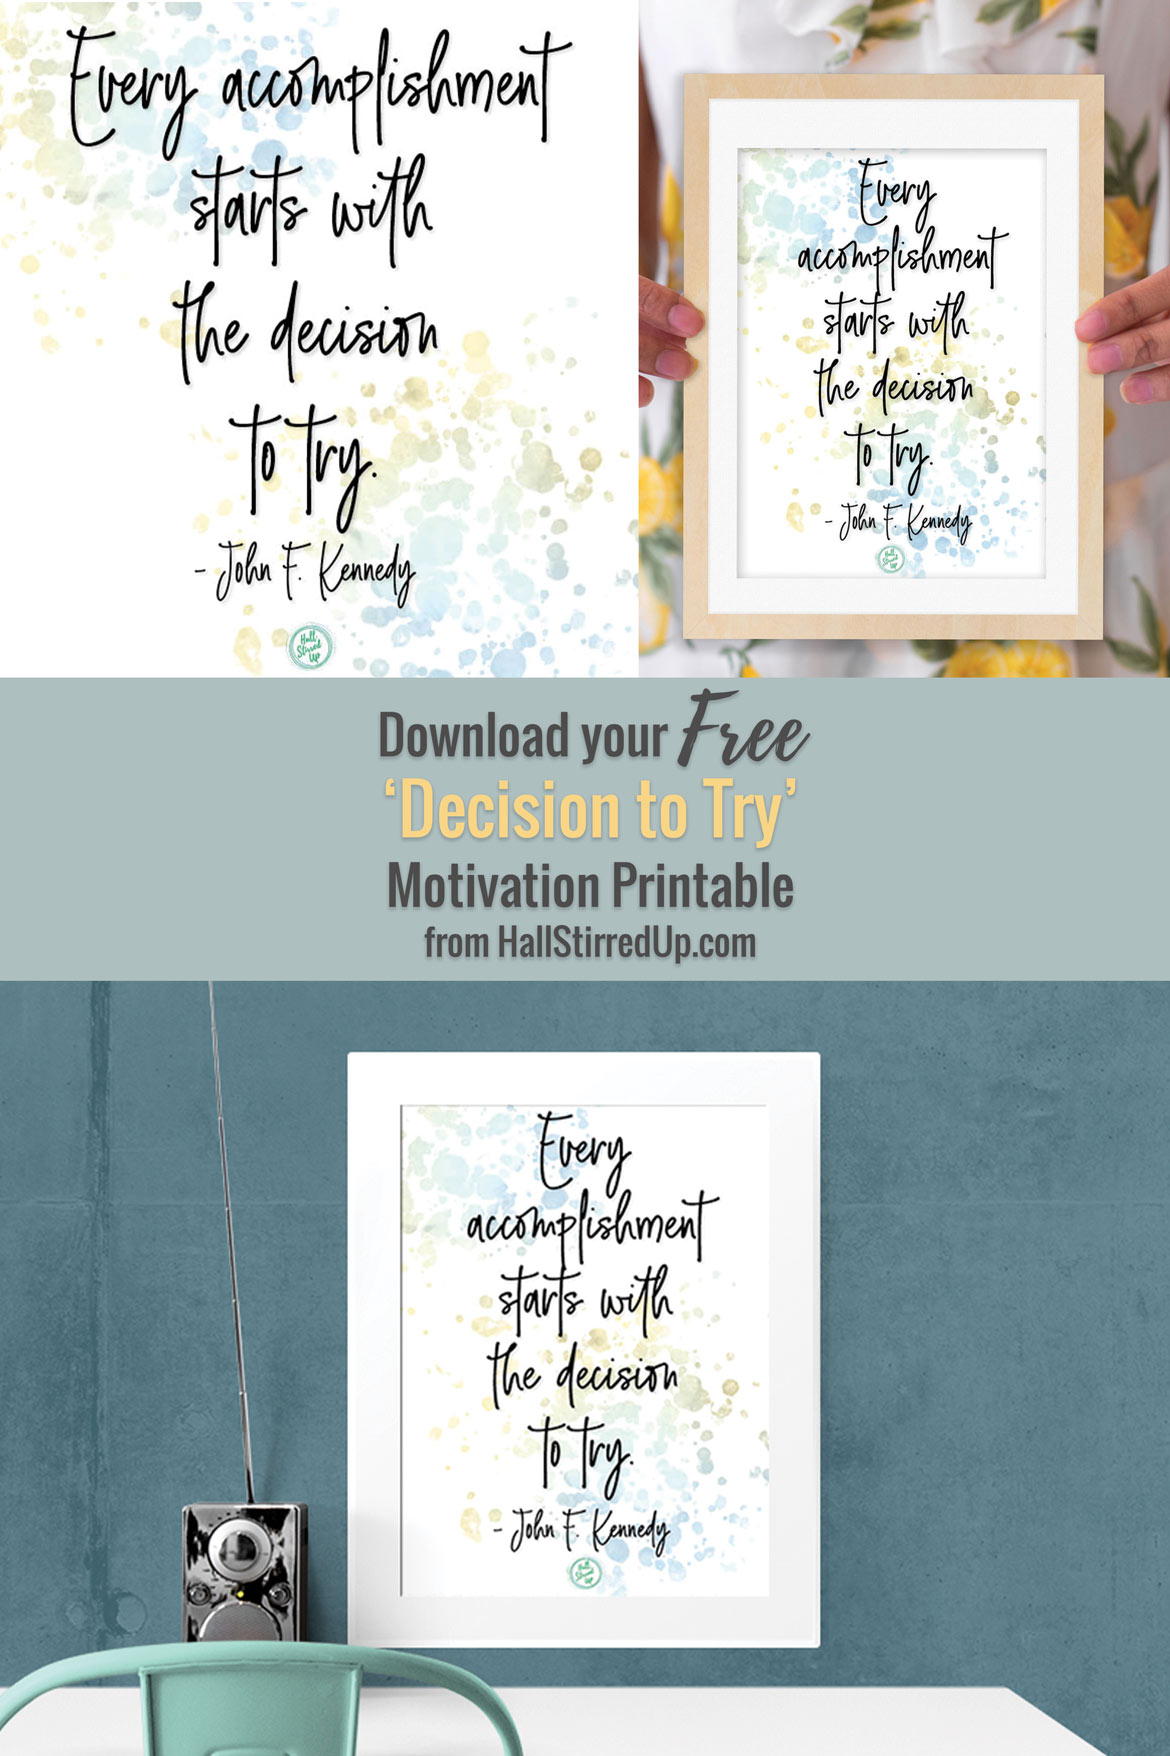 Want more positivity in your life? Surround yourself with inspiration! Includes printable